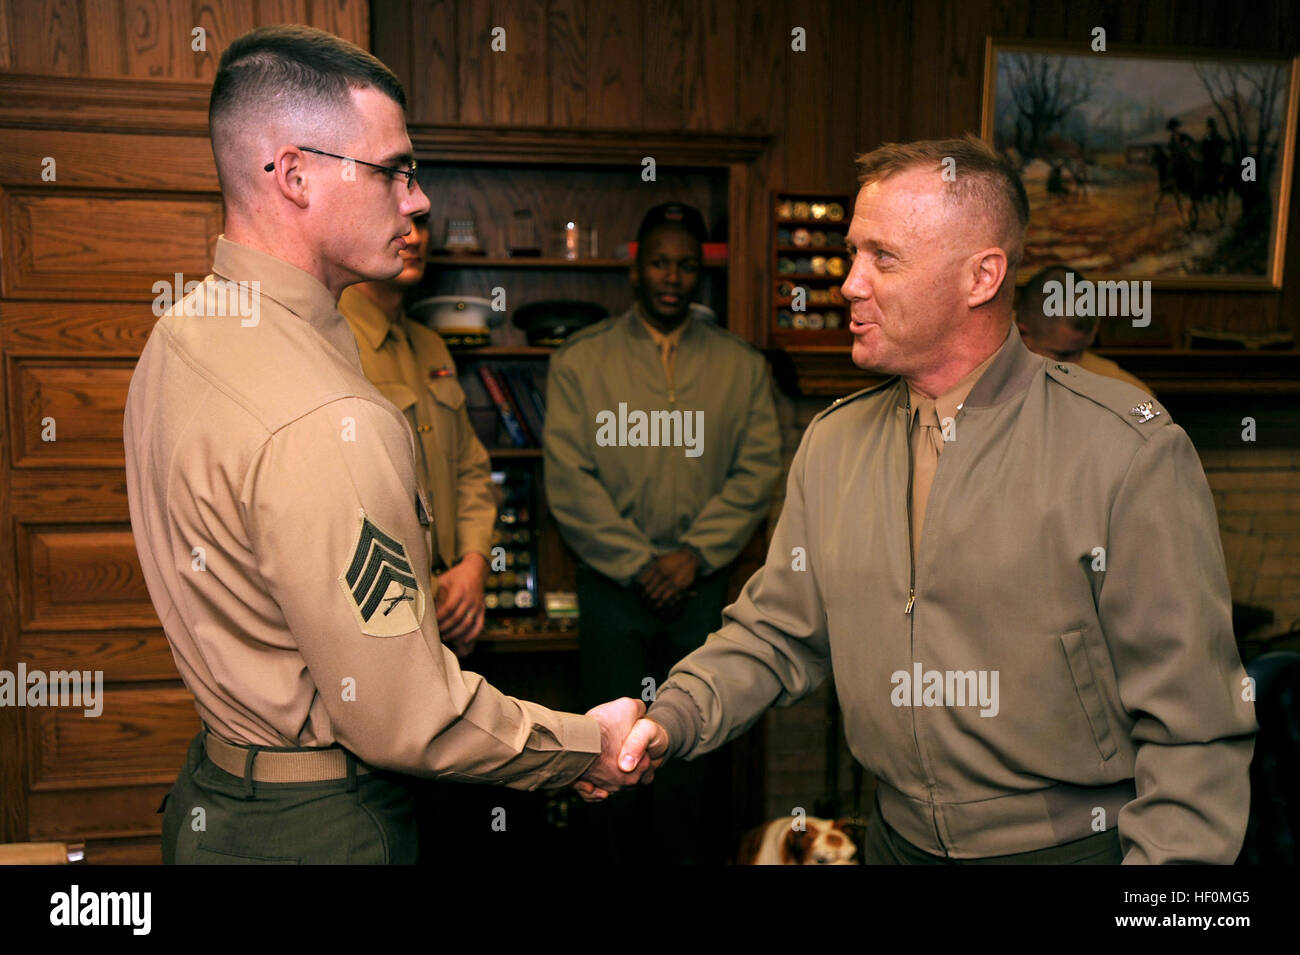 Col. Paul D. Montanus, Marine Barracks Washington commanding officer, congratulates Sgt. Timothy Spreder after announcing Spreder as the next color sergeant of the Marine Corps at Marine Barracks Washington Dec. 6. The 25-year-old native of Florence, Ky., graduated from Simon Kenton High School in 2003 and joined the Marine Corps that summer. Not only does the color sergeant of the Marine Corps bear the nation’s flag, but he is also the senior sergeant in the Corps. Florence man selected as next color sergeant of the Marine Corps 120106-M-HZ646-001 Stock Photo